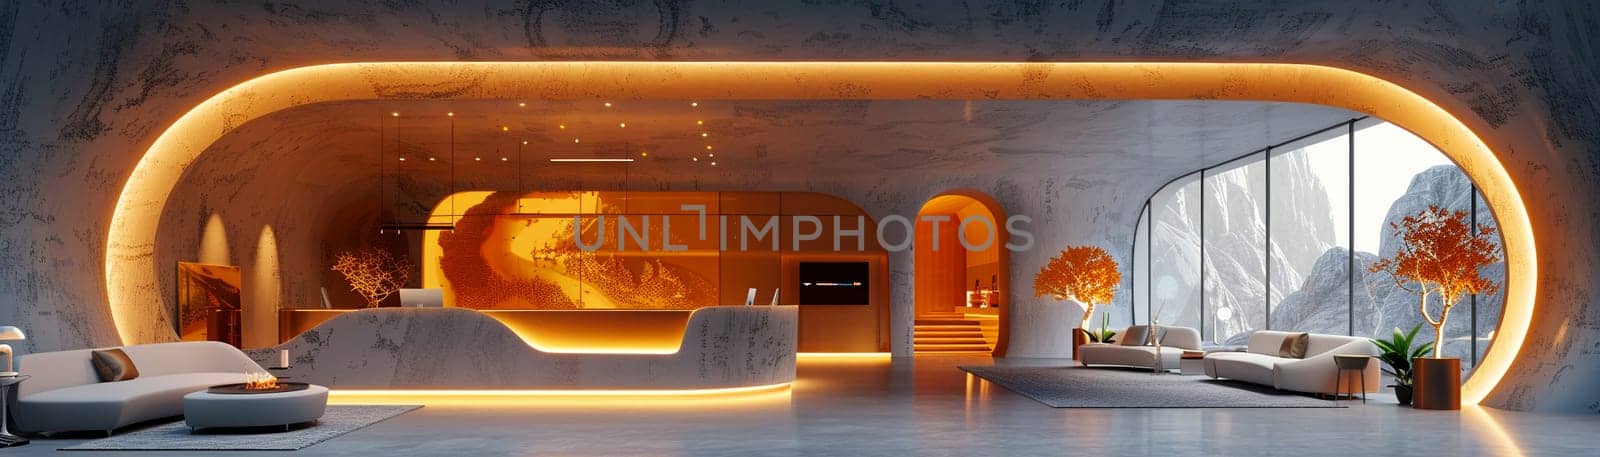 Futuristic bank lobby with interactive screens and sleek surfaces3D render by Benzoix